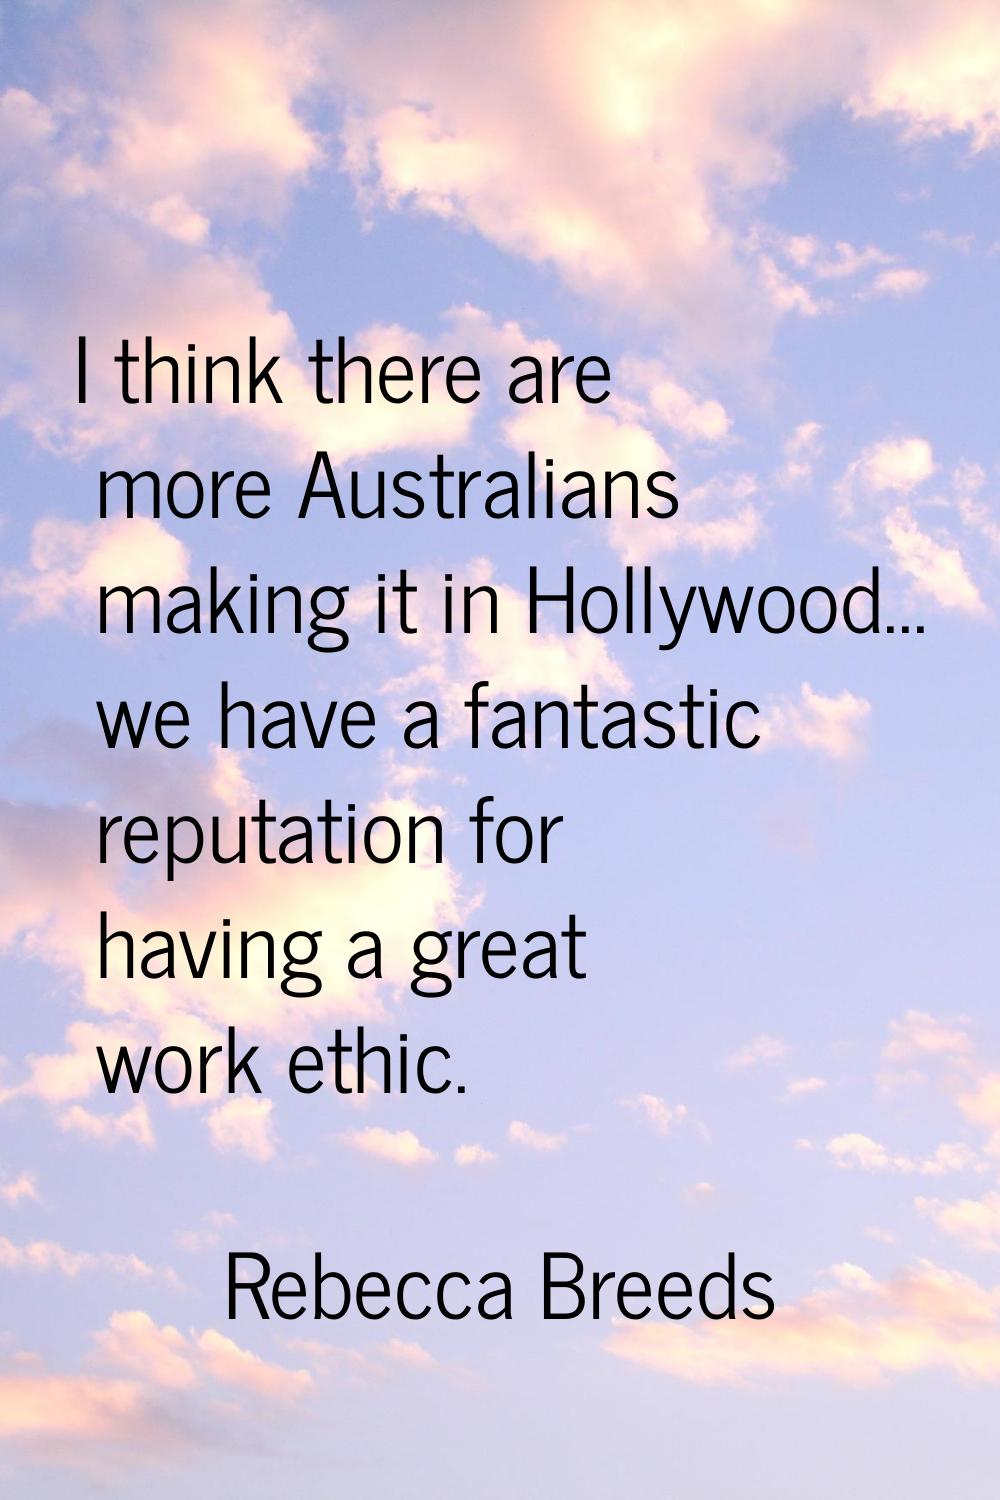 I think there are more Australians making it in Hollywood... we have a fantastic reputation for hav